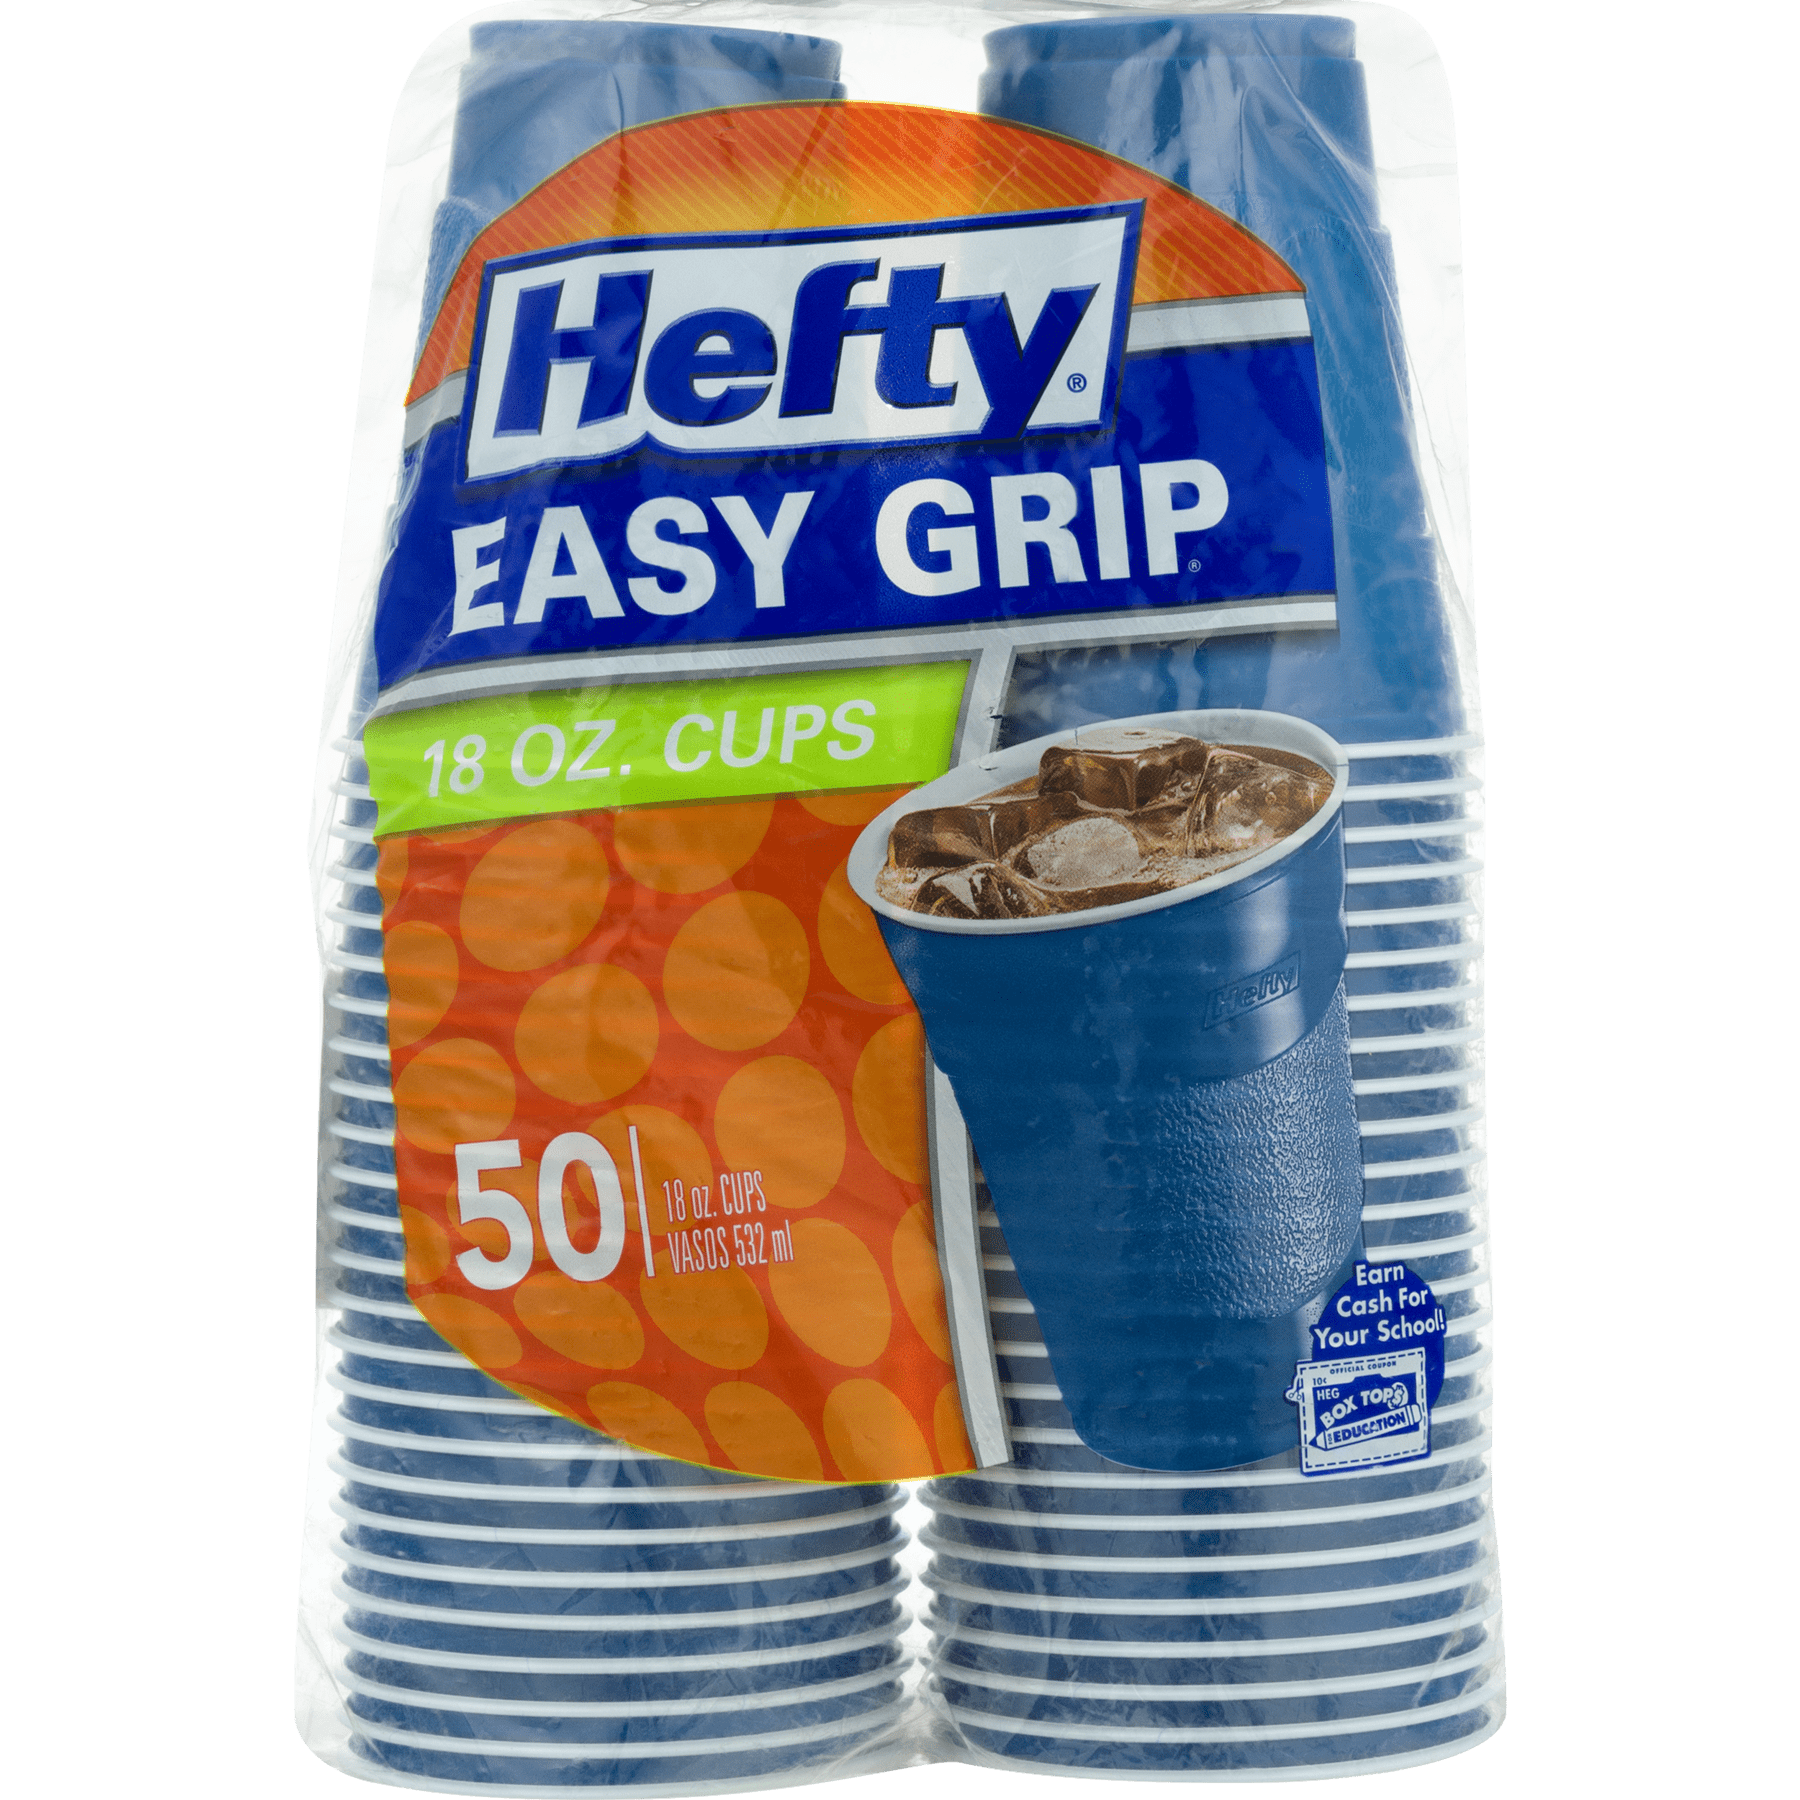 Hefty® Easy Grip® Disposable Plastic Party Cups, 18 oz, Red, 50/Pack, –  Office Ready